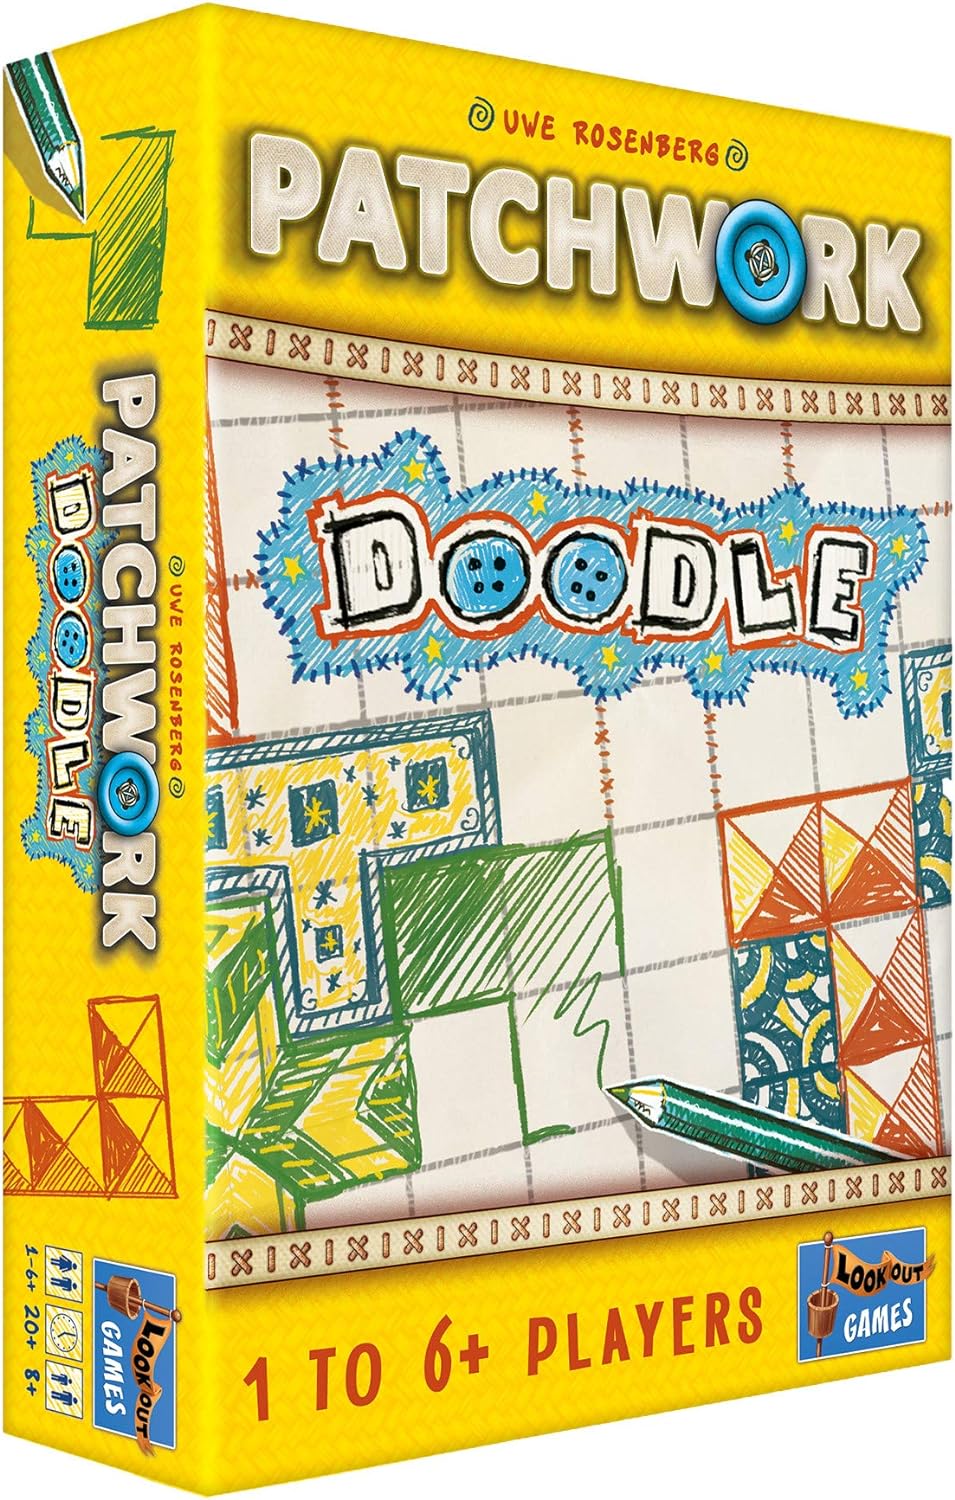 Patchwork Doodle is a roll-and-write version of Patchwork Sold by Board Hoarders